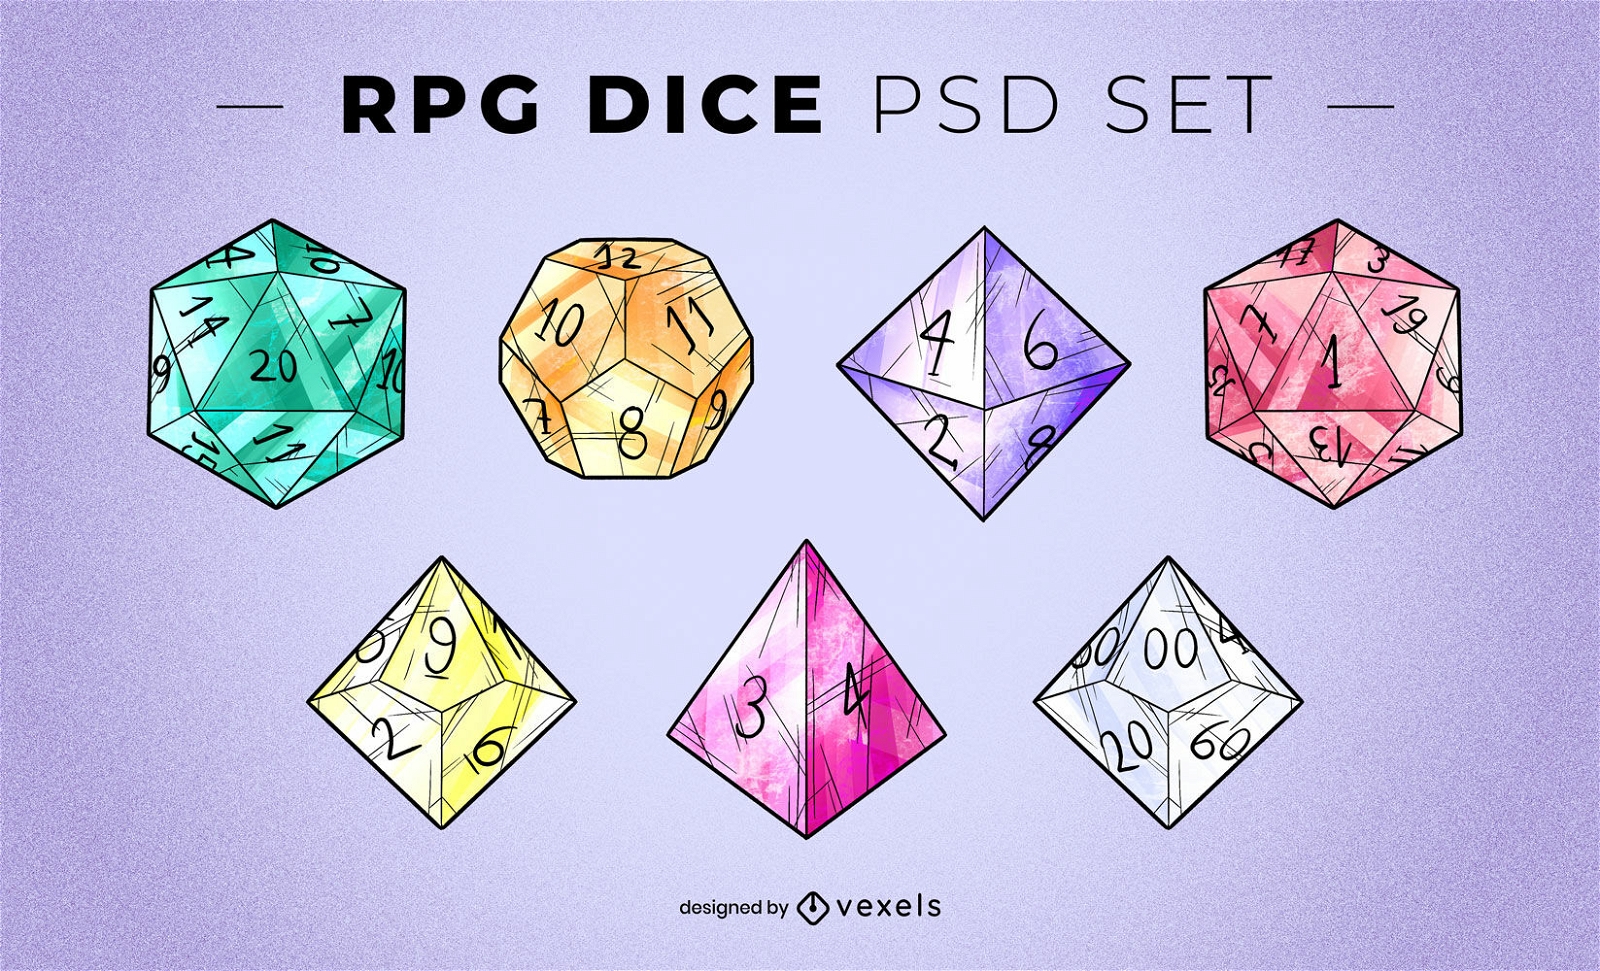 Role play dices PSD illustration set